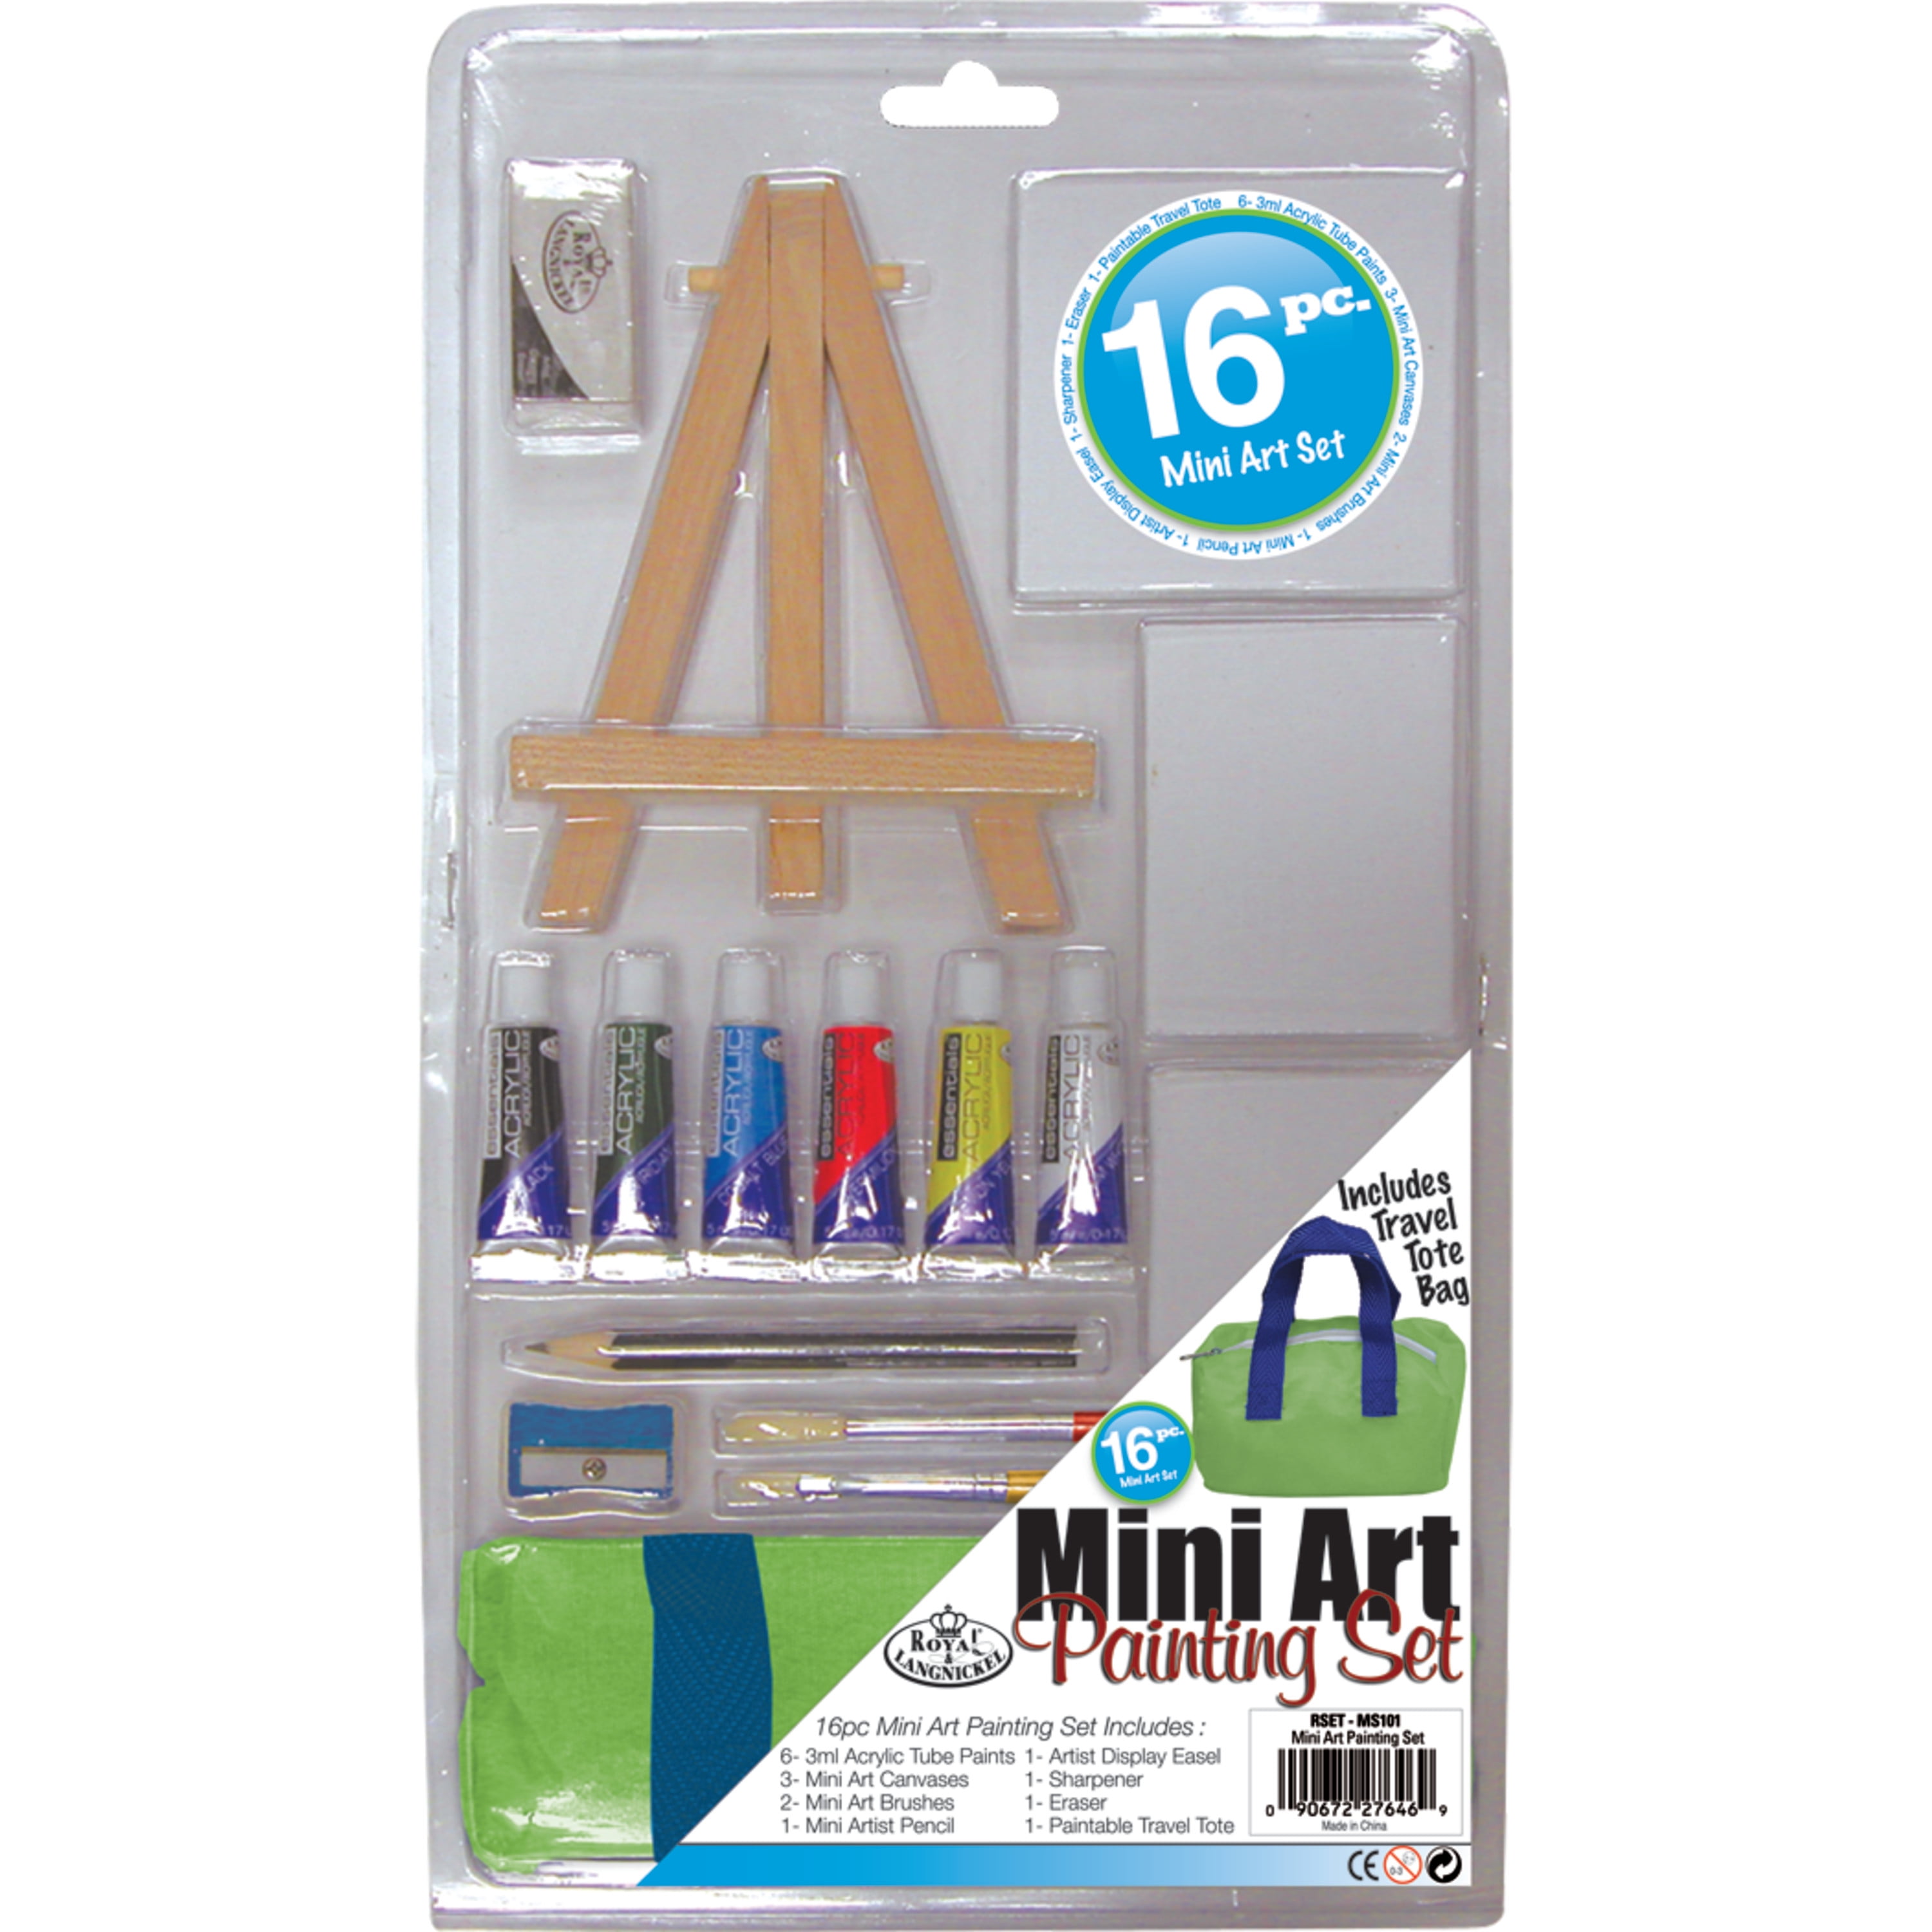 Royal & Langnickel Essentials - 157pc Sketching & Drawing Art Set, for  Beginner to Advanced Artists